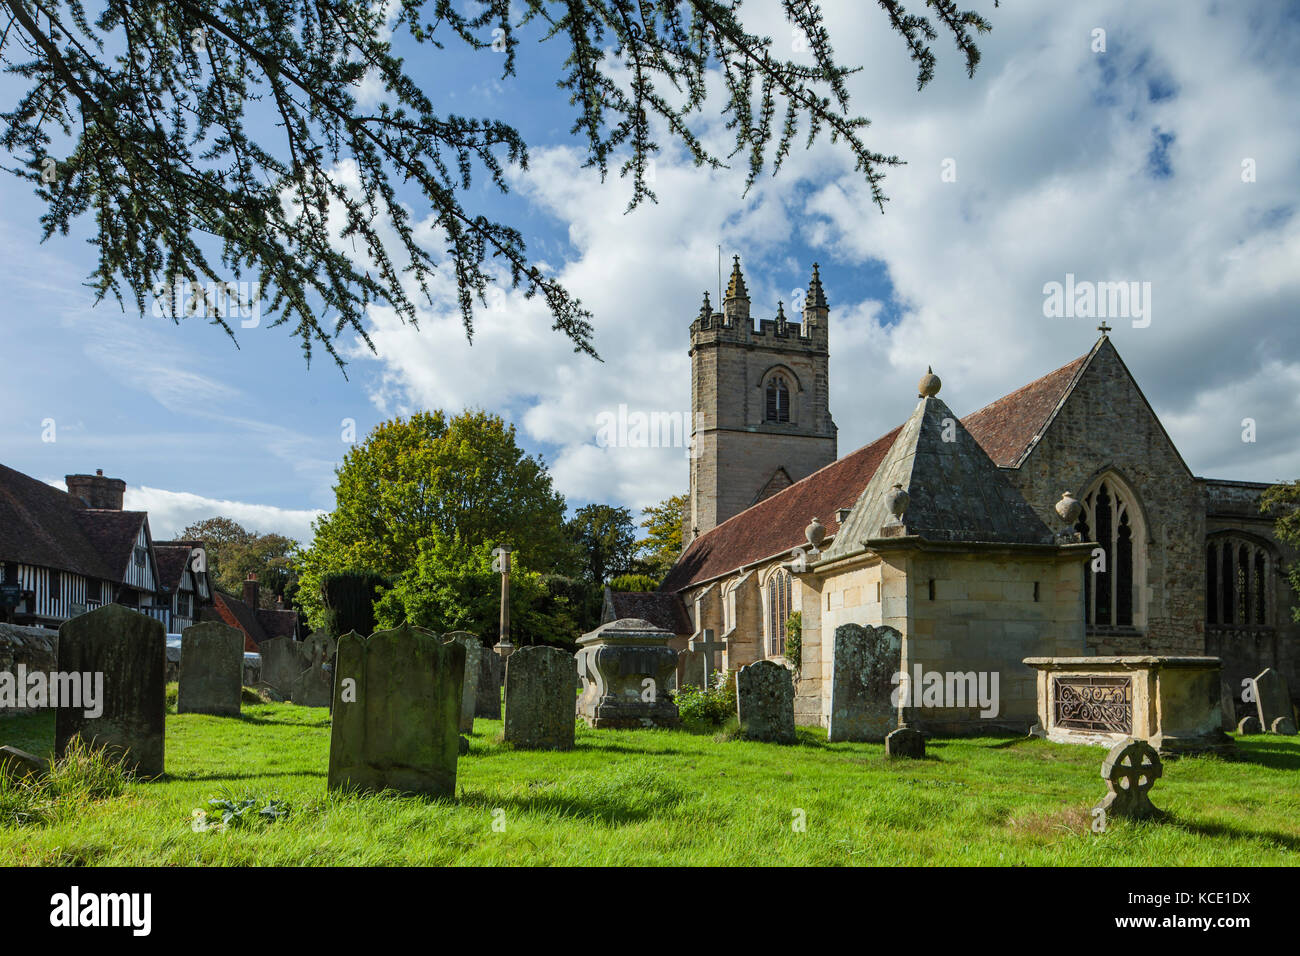 Autumn day at St Mary's church in Chiddingstone village, Kent, England. Stock Photo